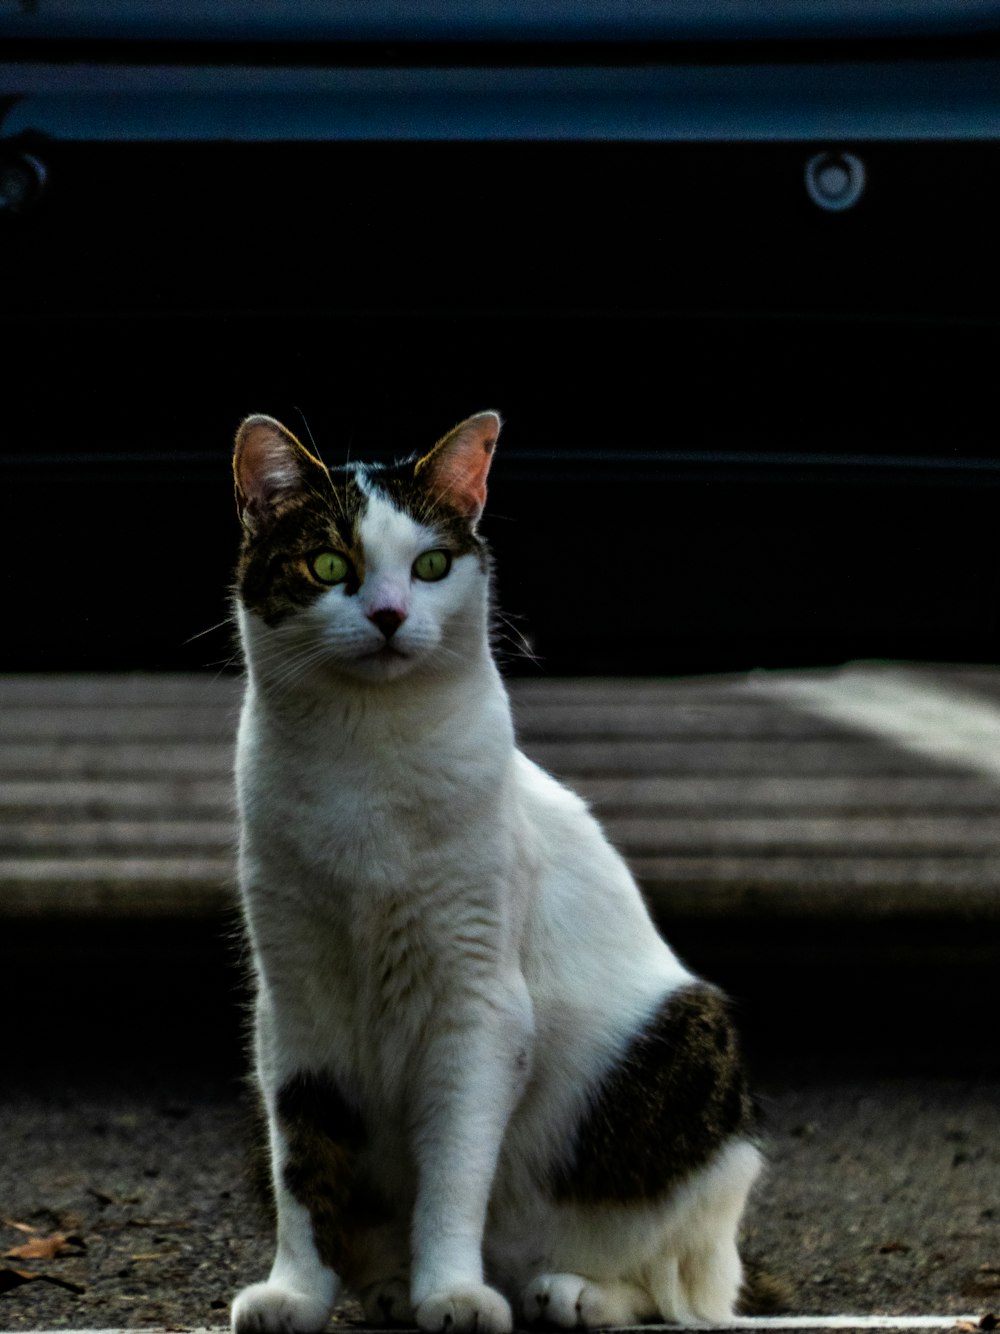 a cat sitting on the ground next to a car